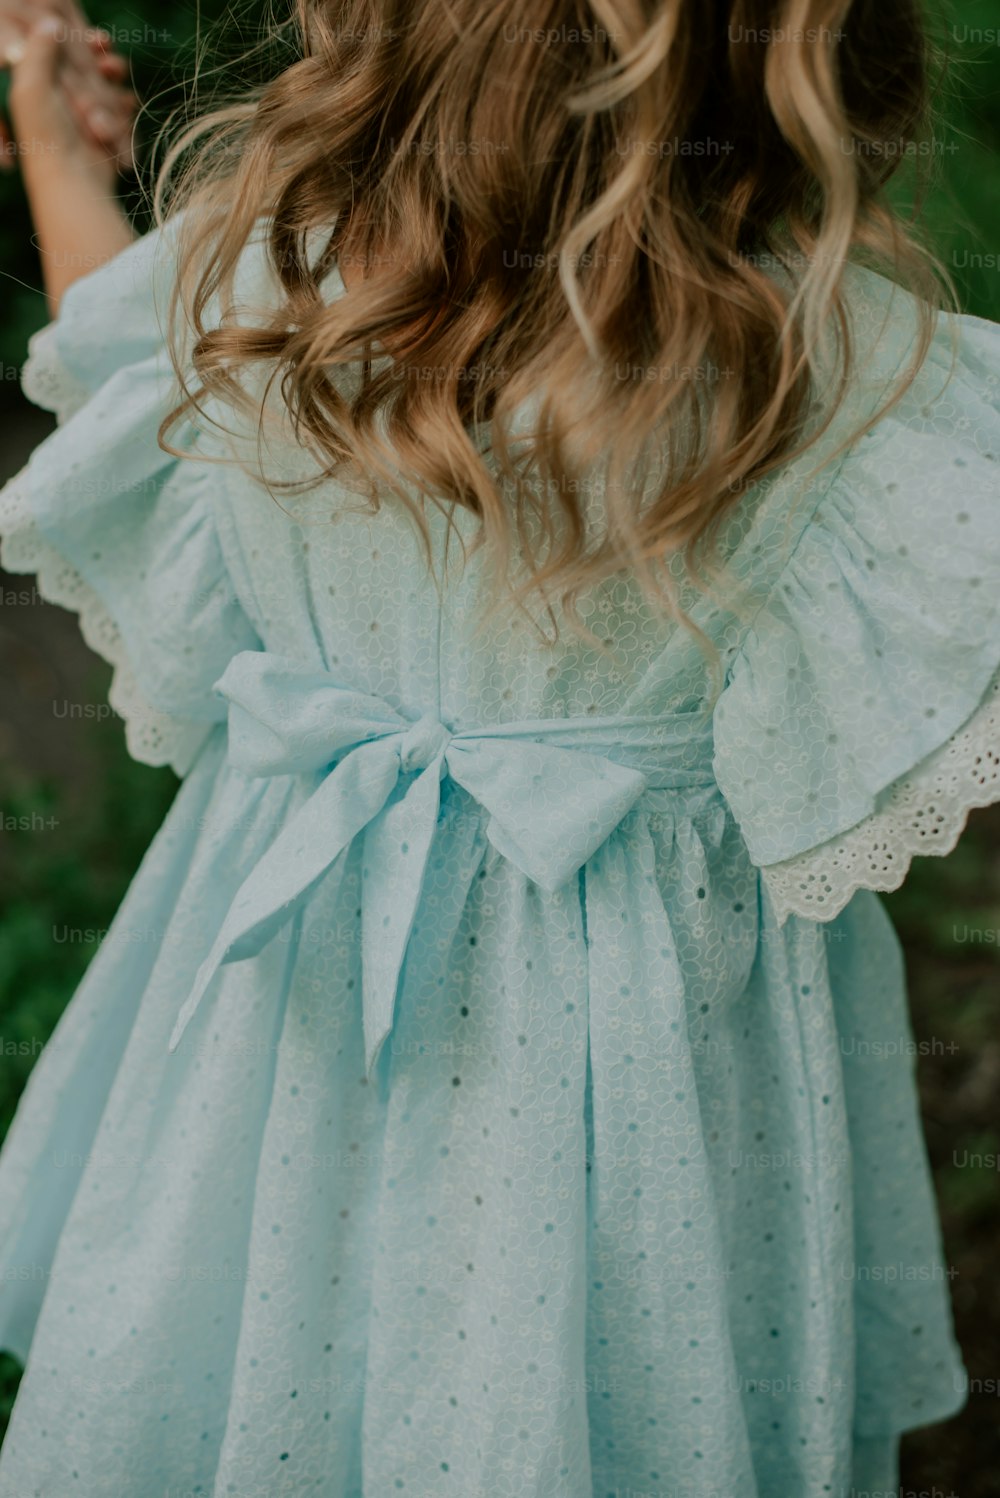 a little girl wearing a blue dress with a bow